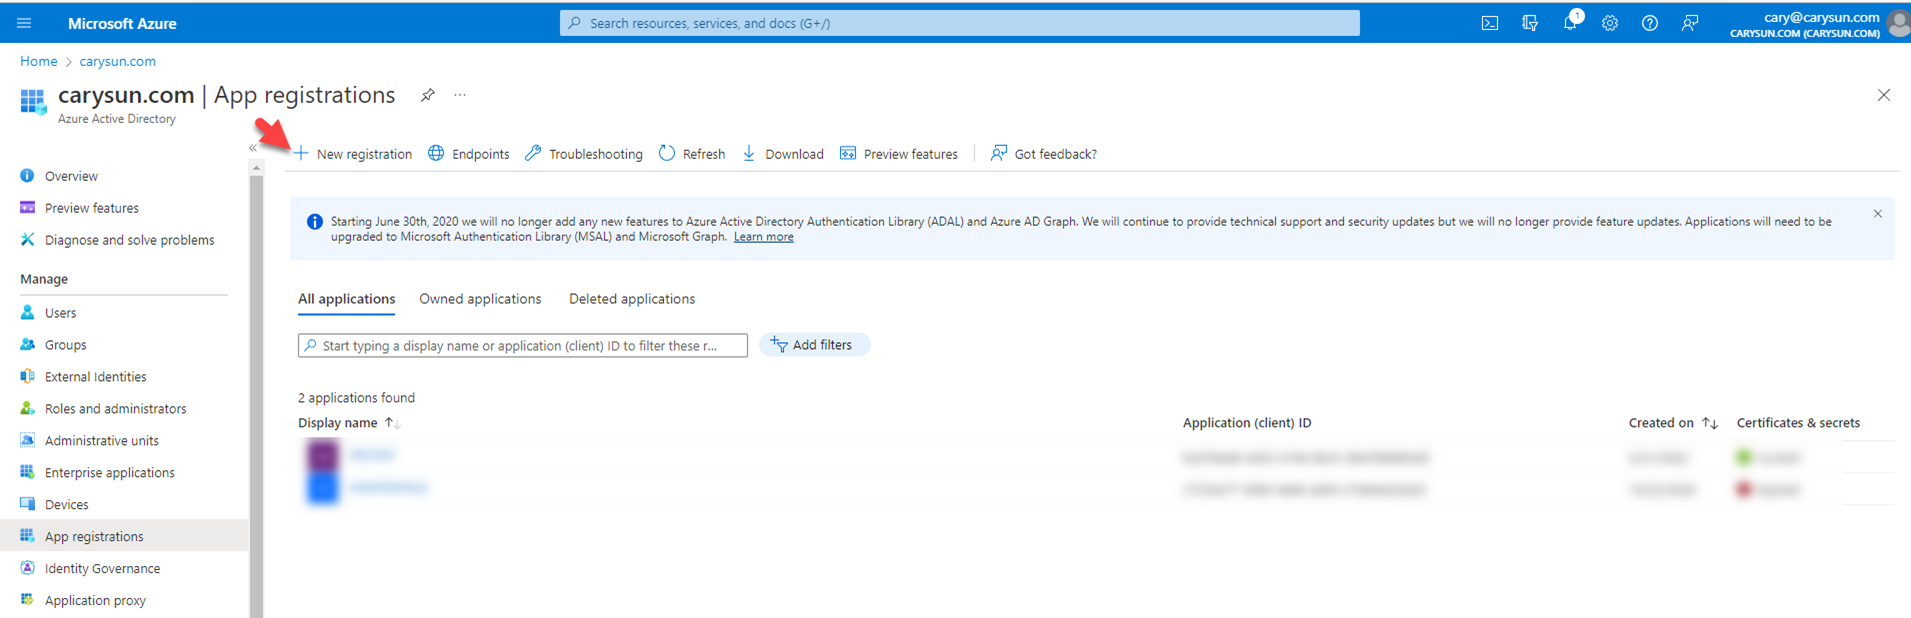 042022 1642 Howtoconfig6 - How to configure Azure AD Application Permissions for Modern App-Only Authentication of Veeam Backup for Microsoft 365